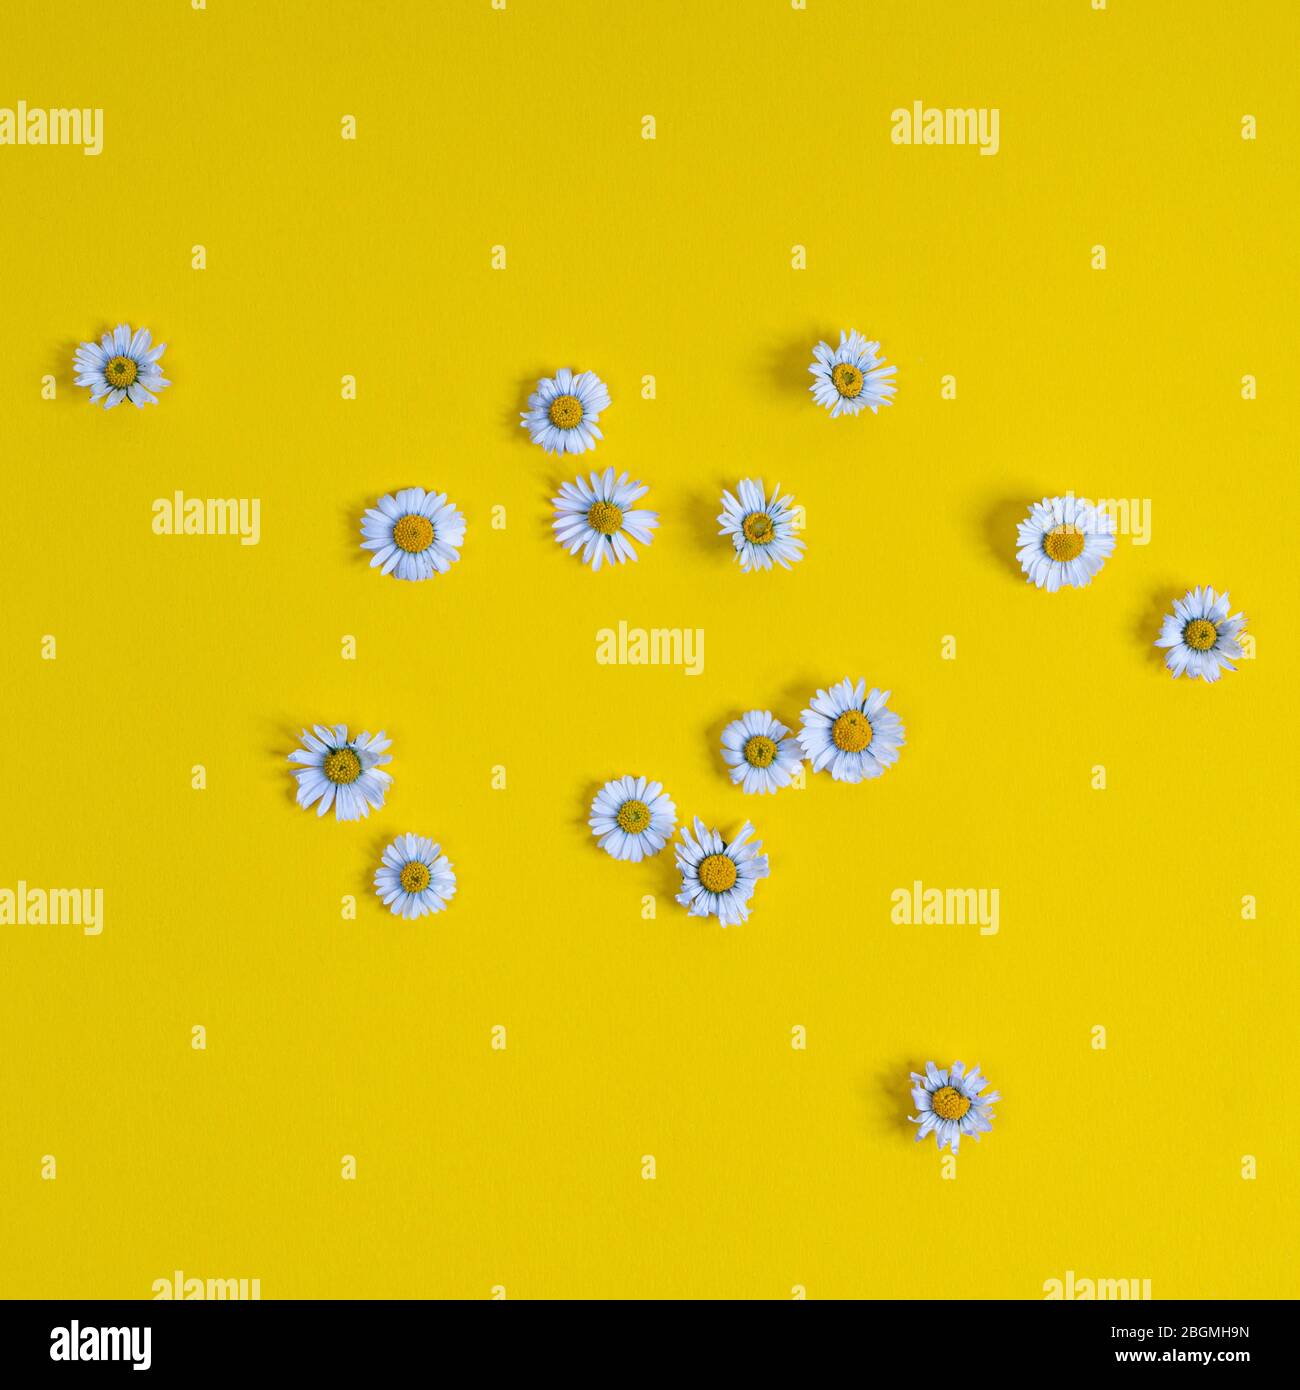 some daisies scattered on a yellow surface Stock Photo